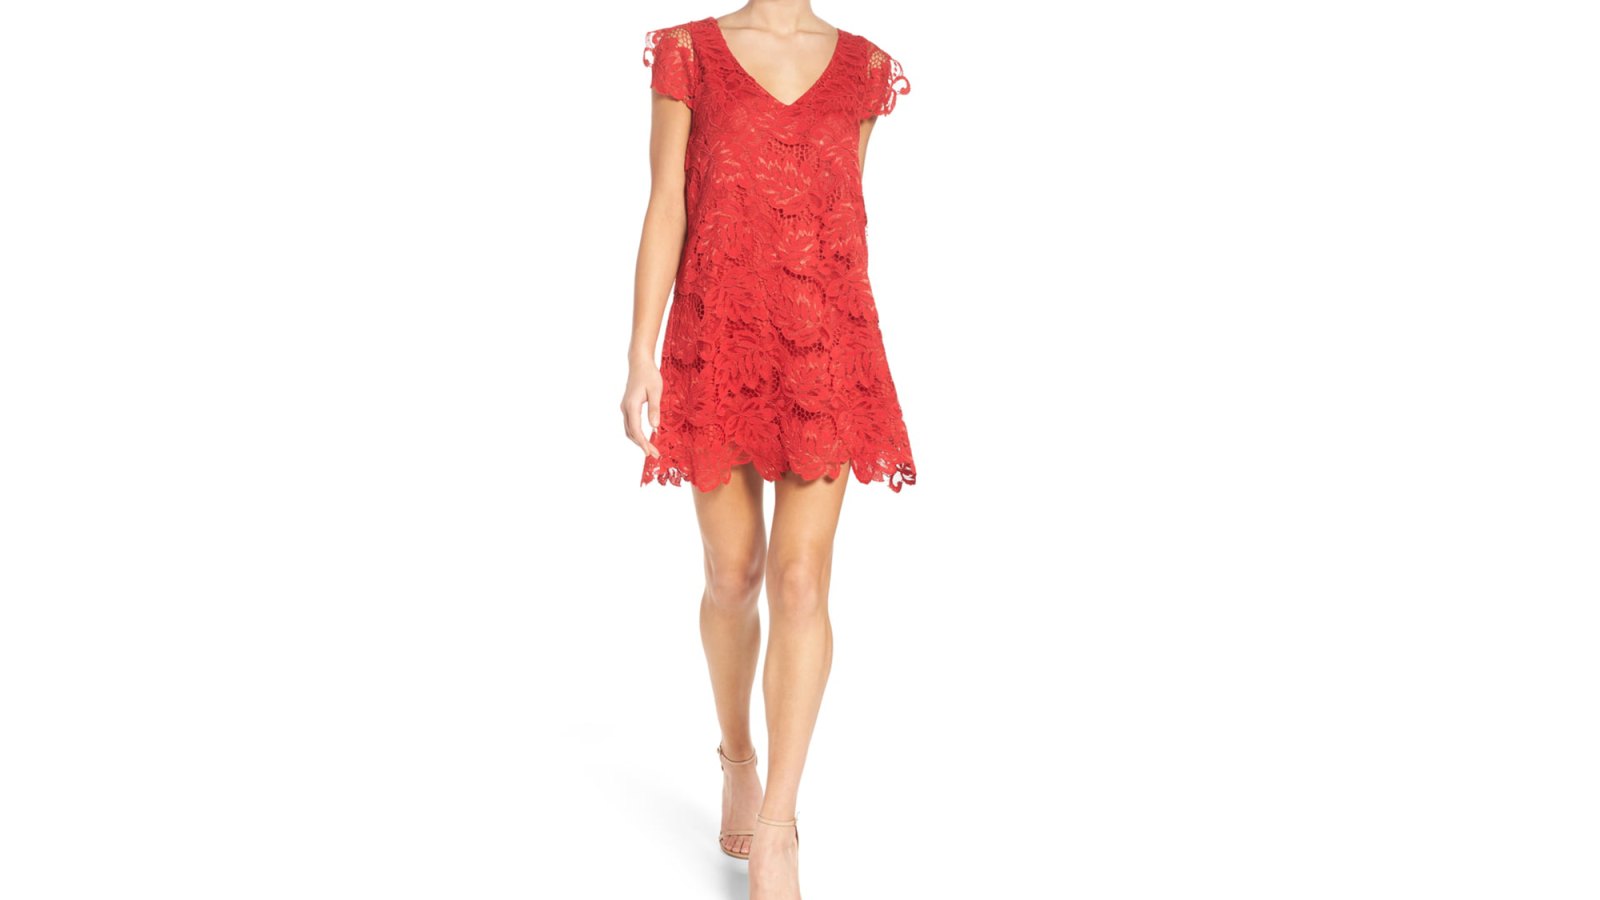 This Floral and Lace Dress Is So Stunning, We Want It in Every Color